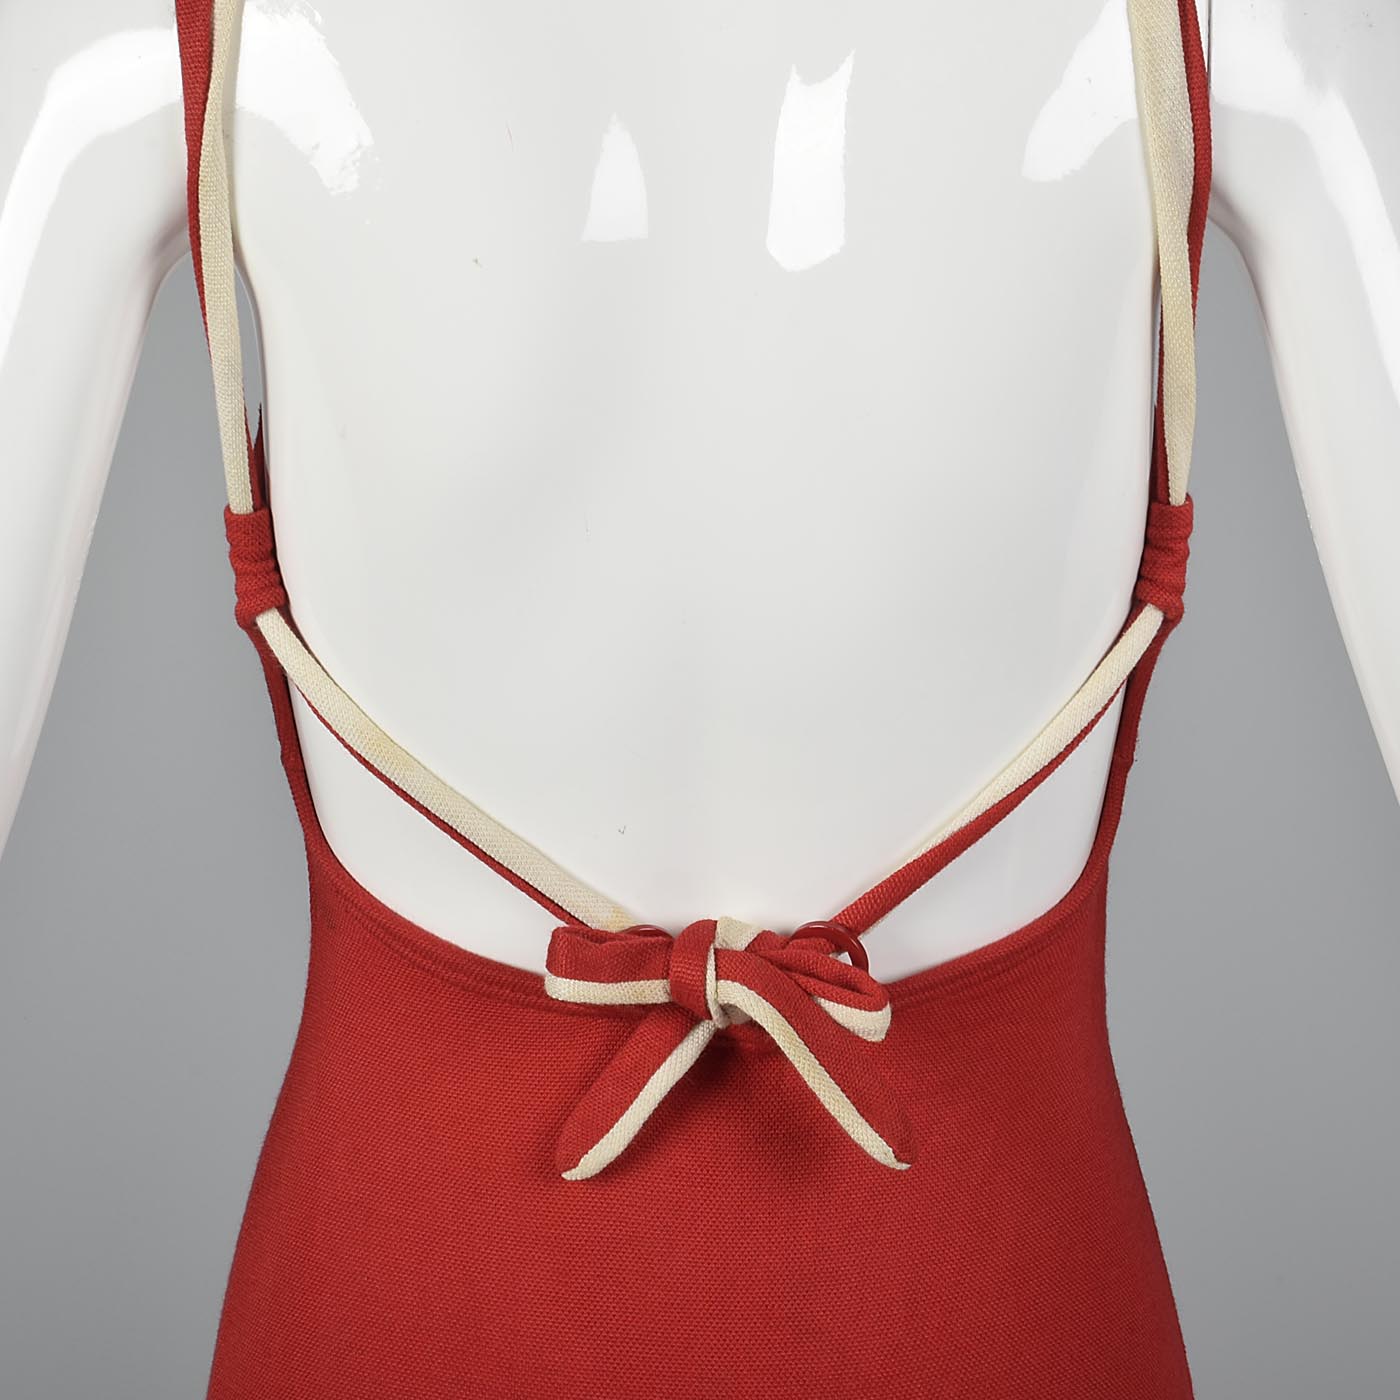 1930s Jantzen Red Swimsuit with Drawstring Back